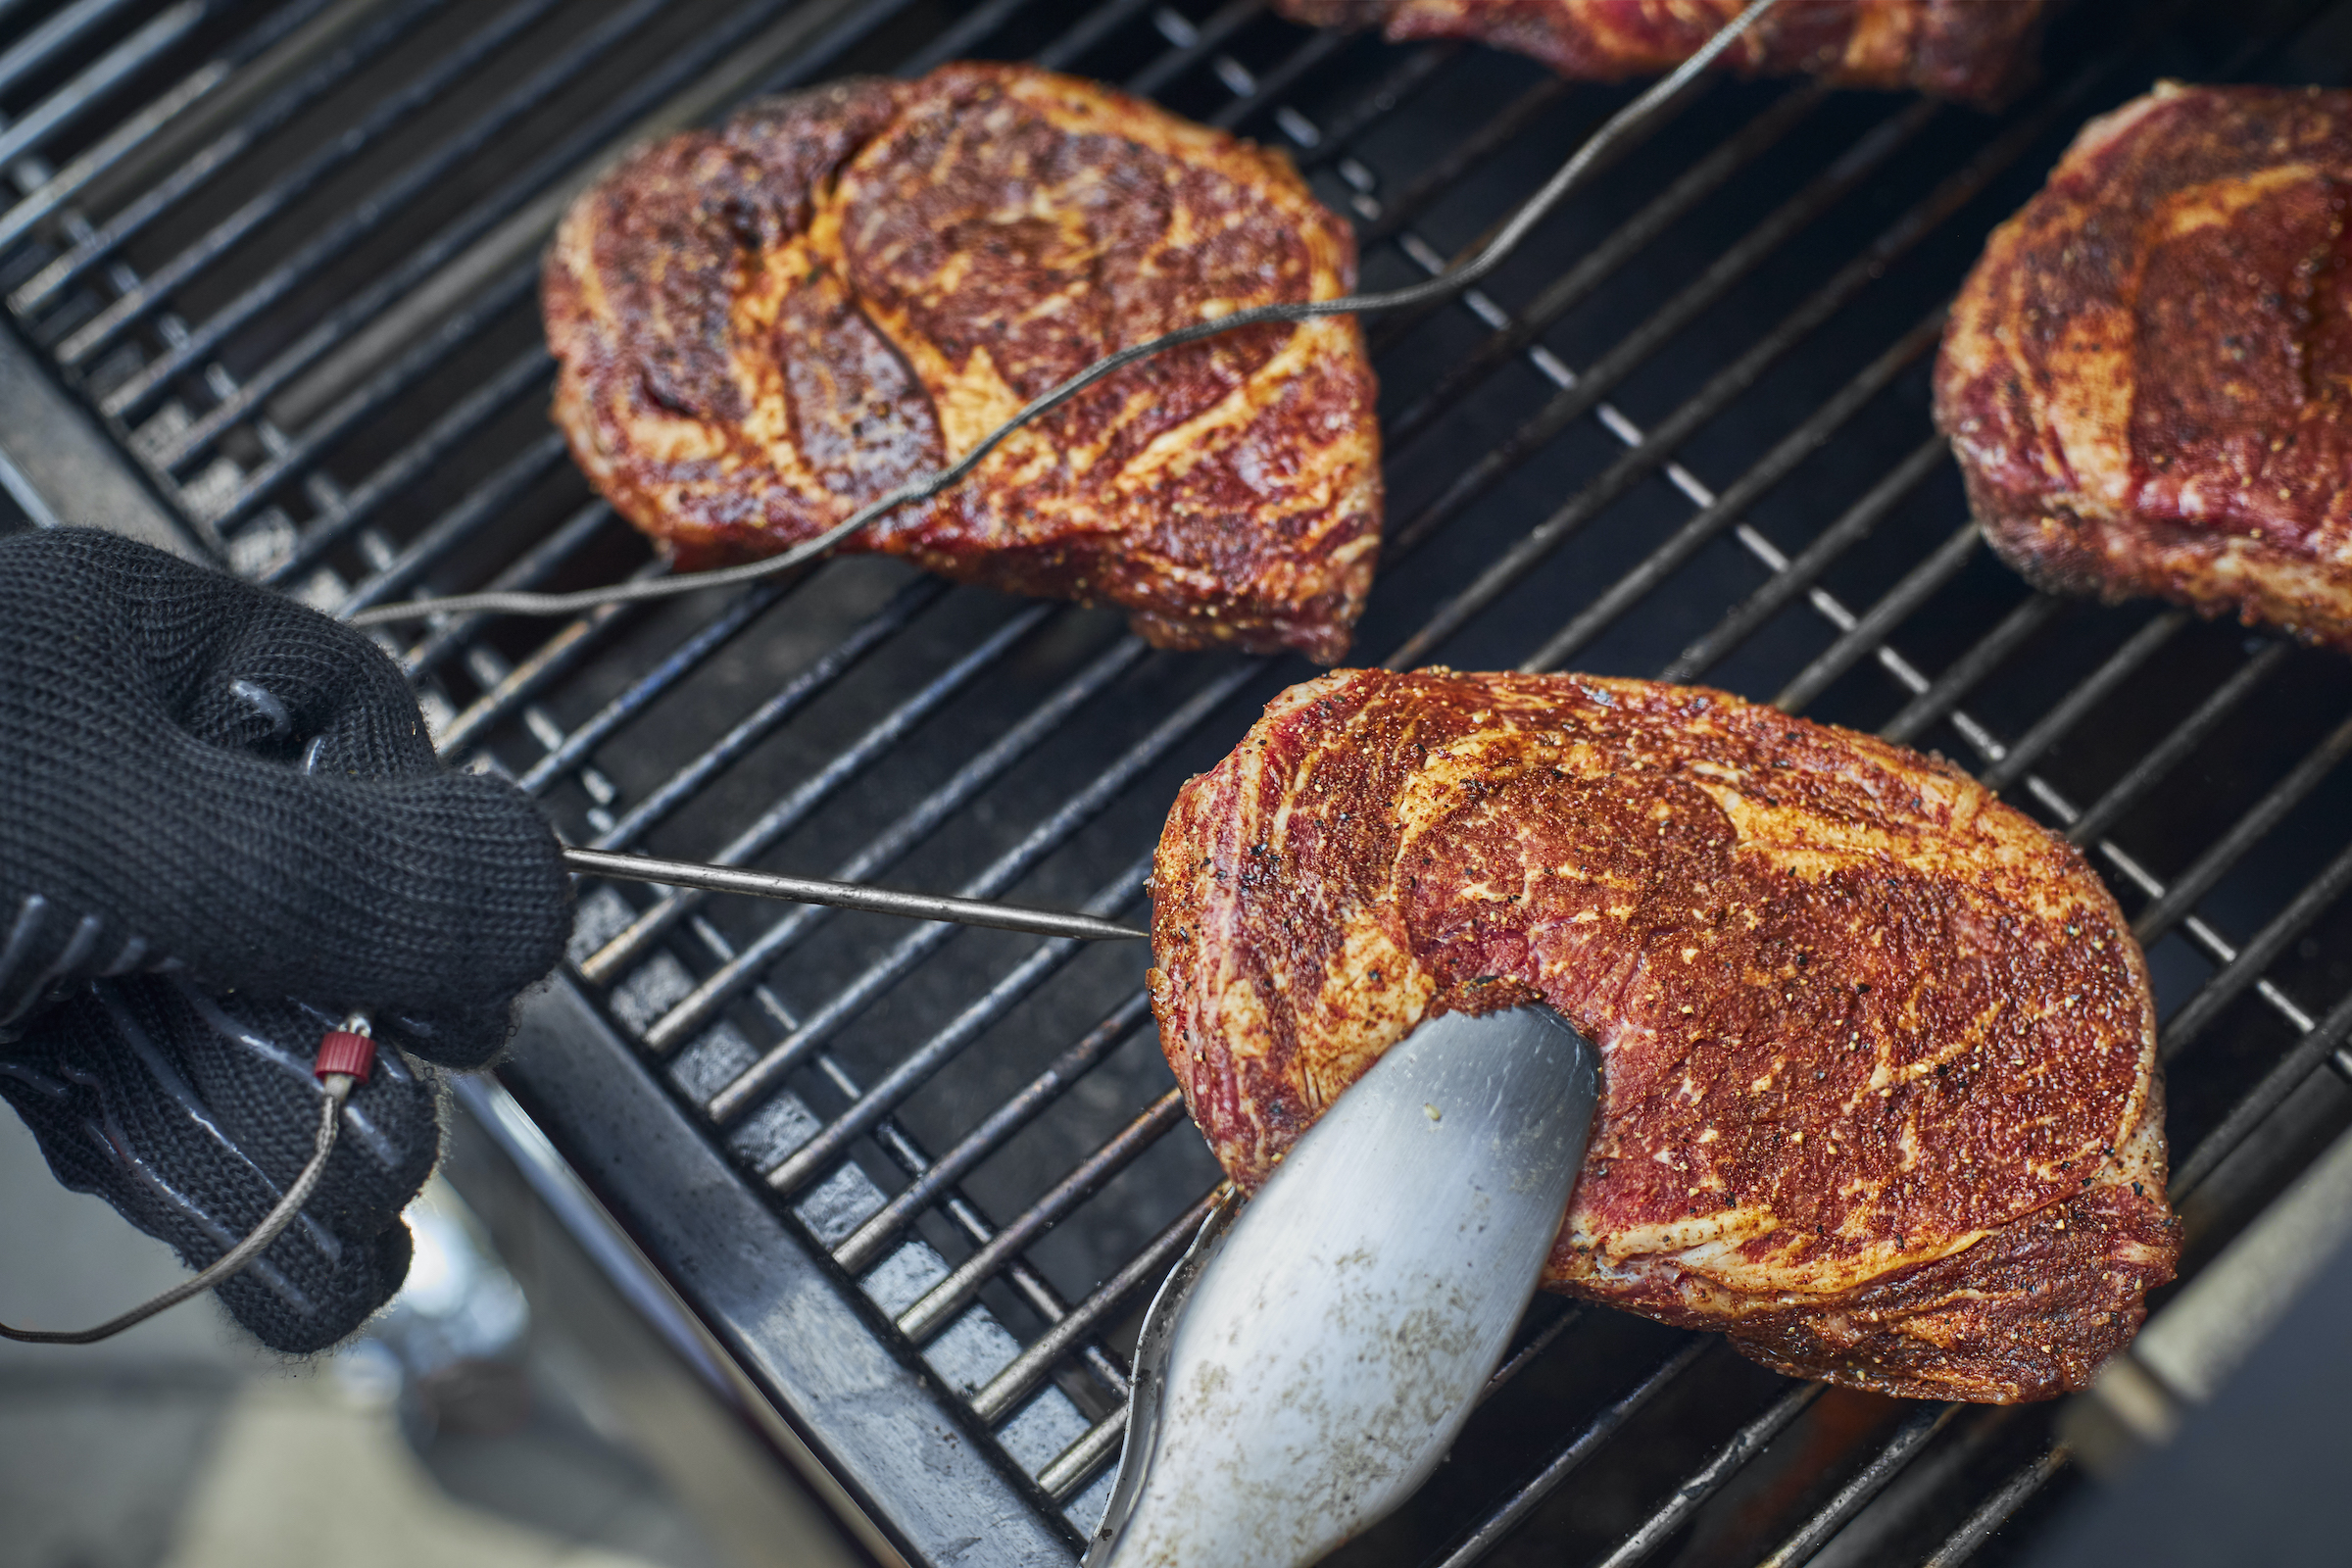 Weber S New Smart Grilling Hub Uses June Tech To Make Everyone A